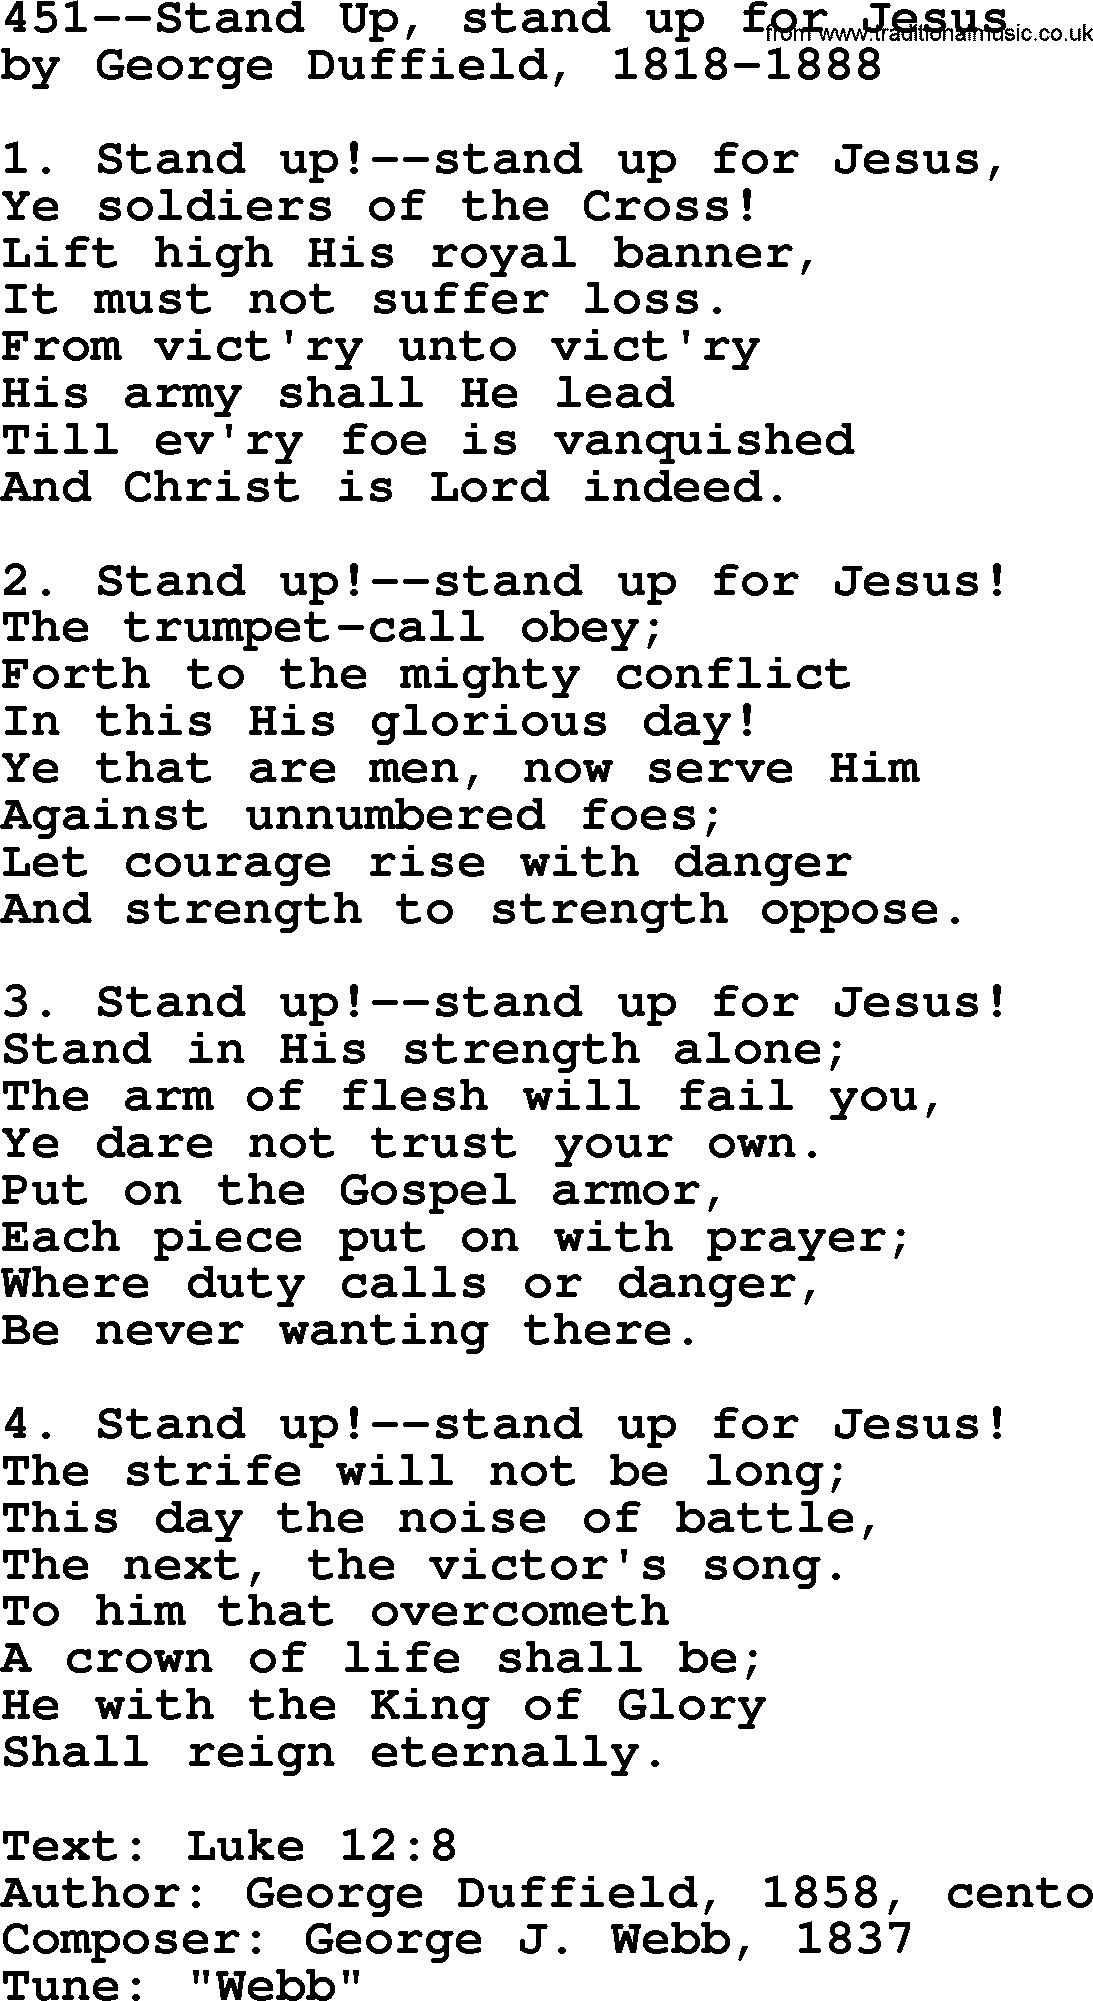 Lutheran Hymn: 451--Stand Up, stand up for Jesus.txt lyrics with PDF